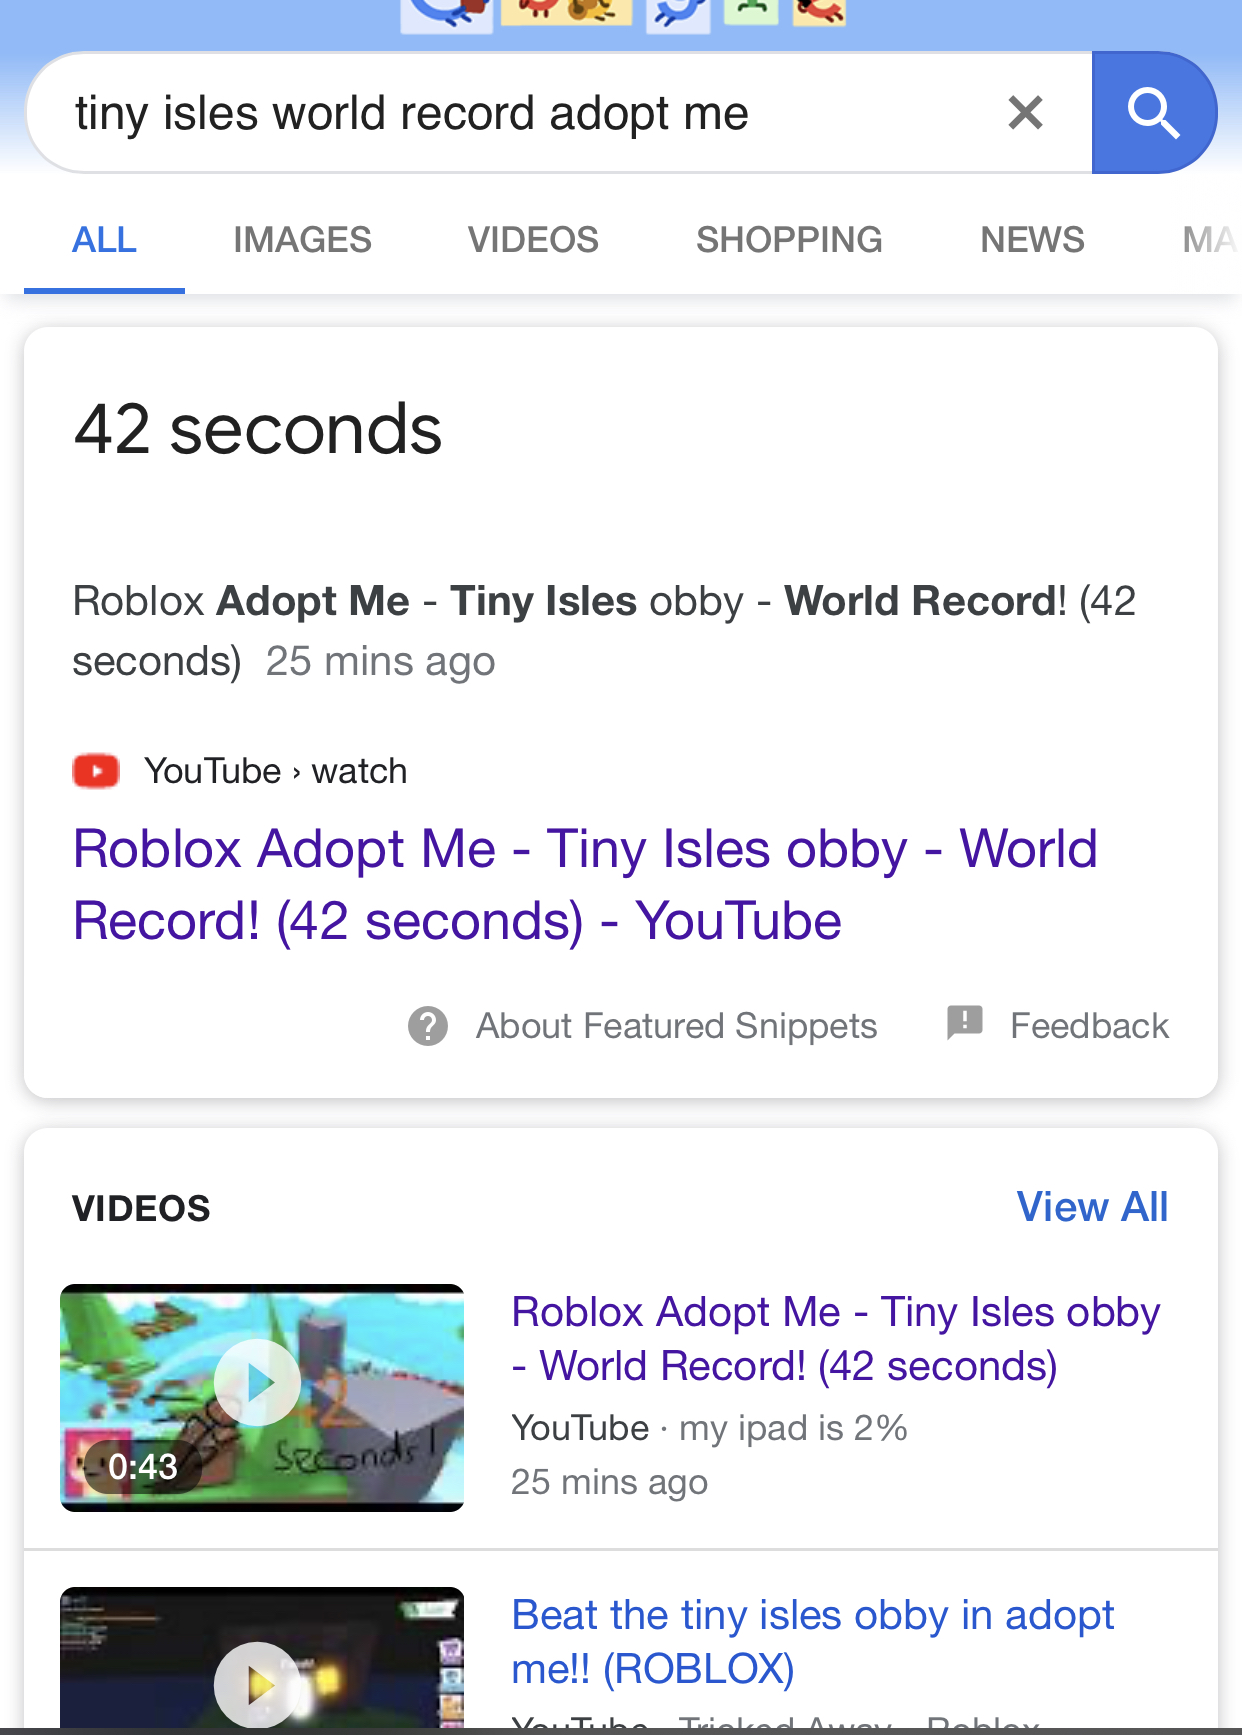 Omg Roblox Adopt Me Tiny Isles World Record I Did It 42 Seconds P Fandom - beat the obby roblox